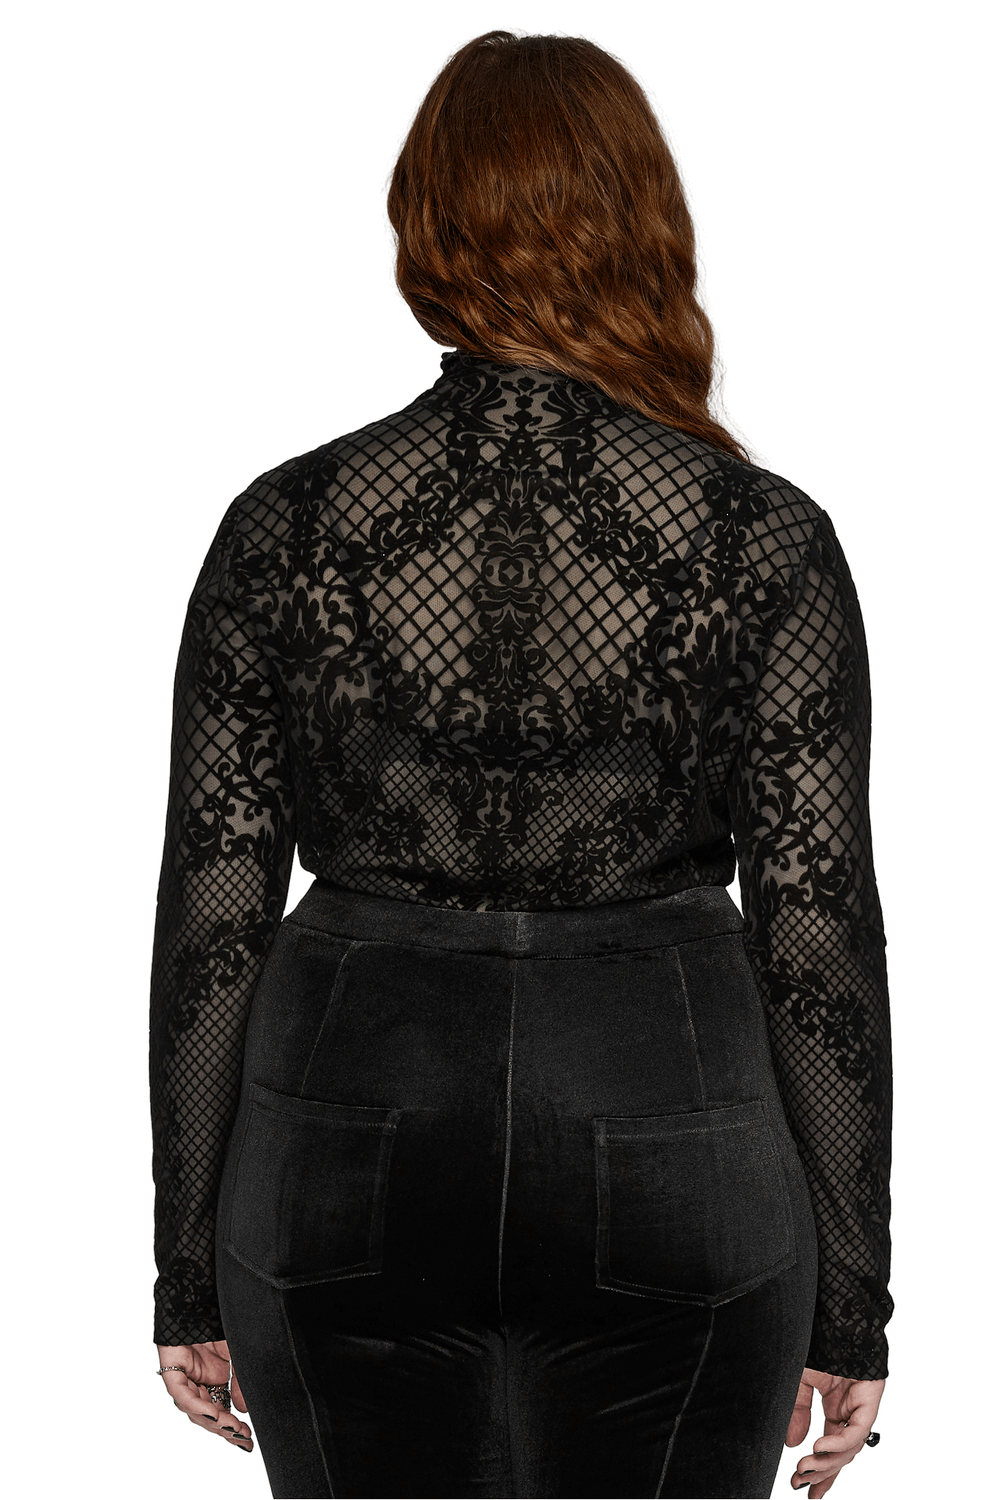 Gothic Flocked Mesh Long Sleeves High-Collar Top